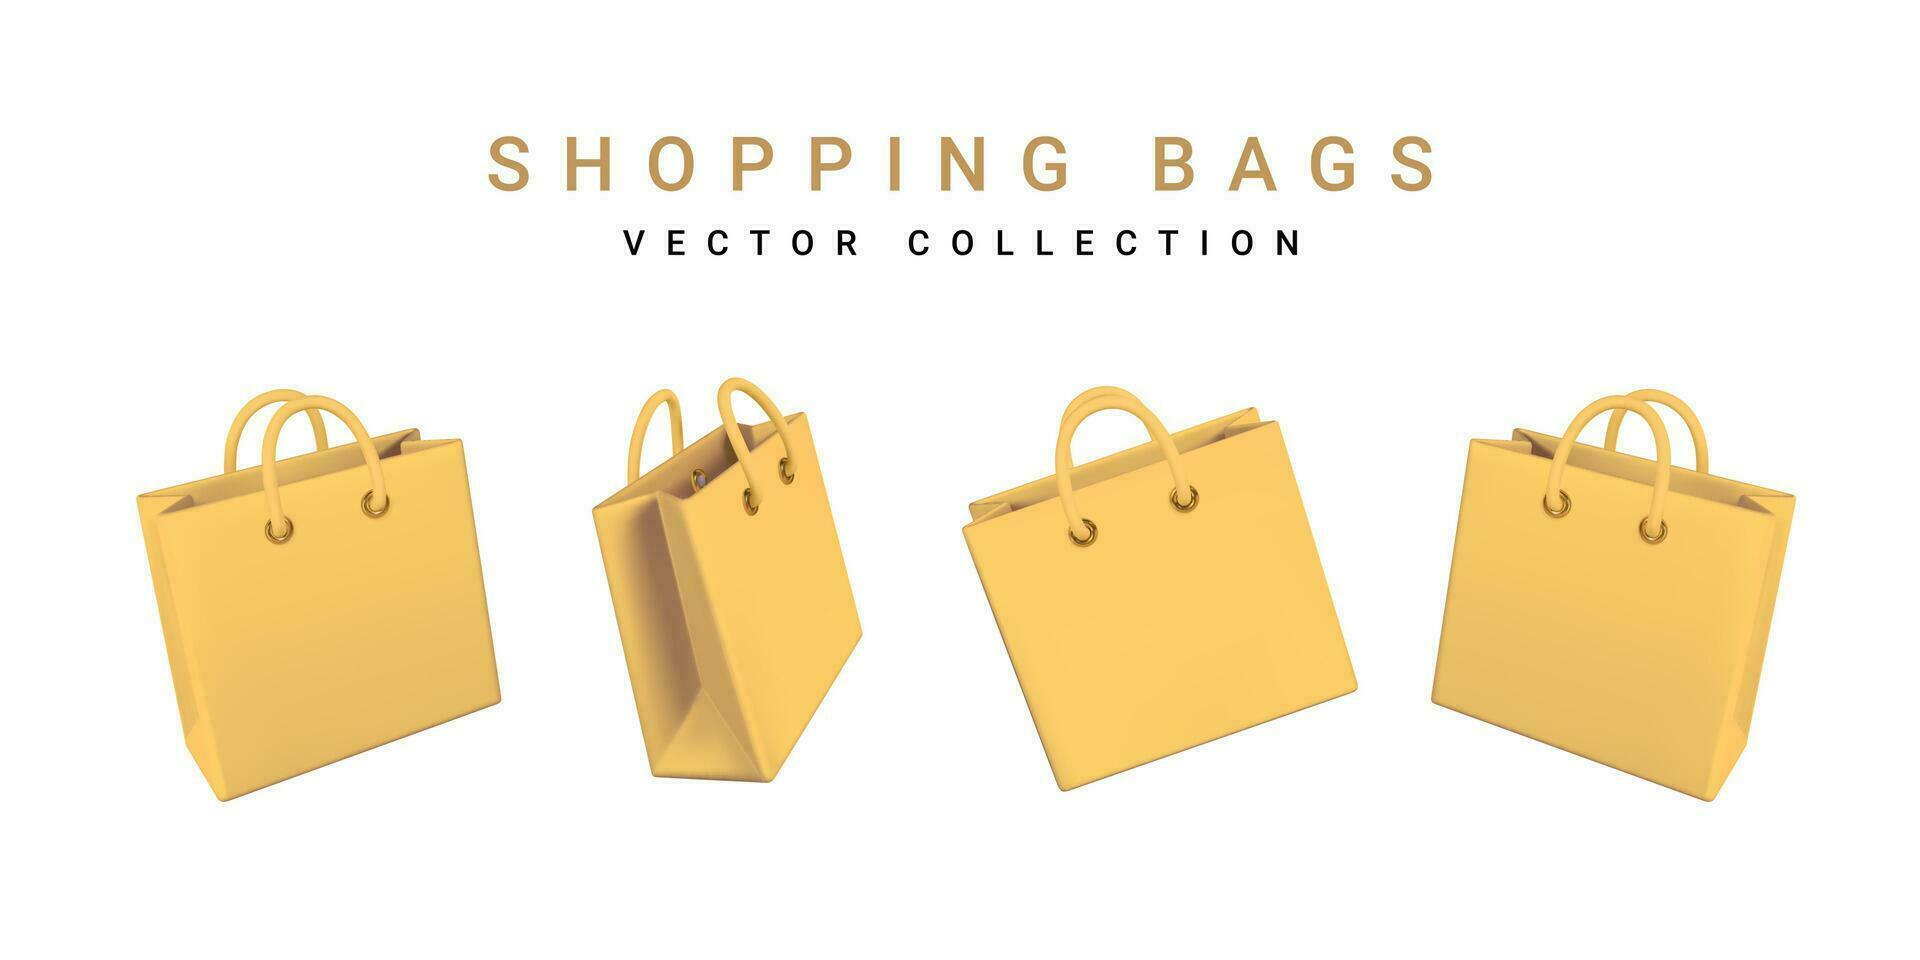 3d empty shopping bags on a white background. Shopping concept. Vector illustration